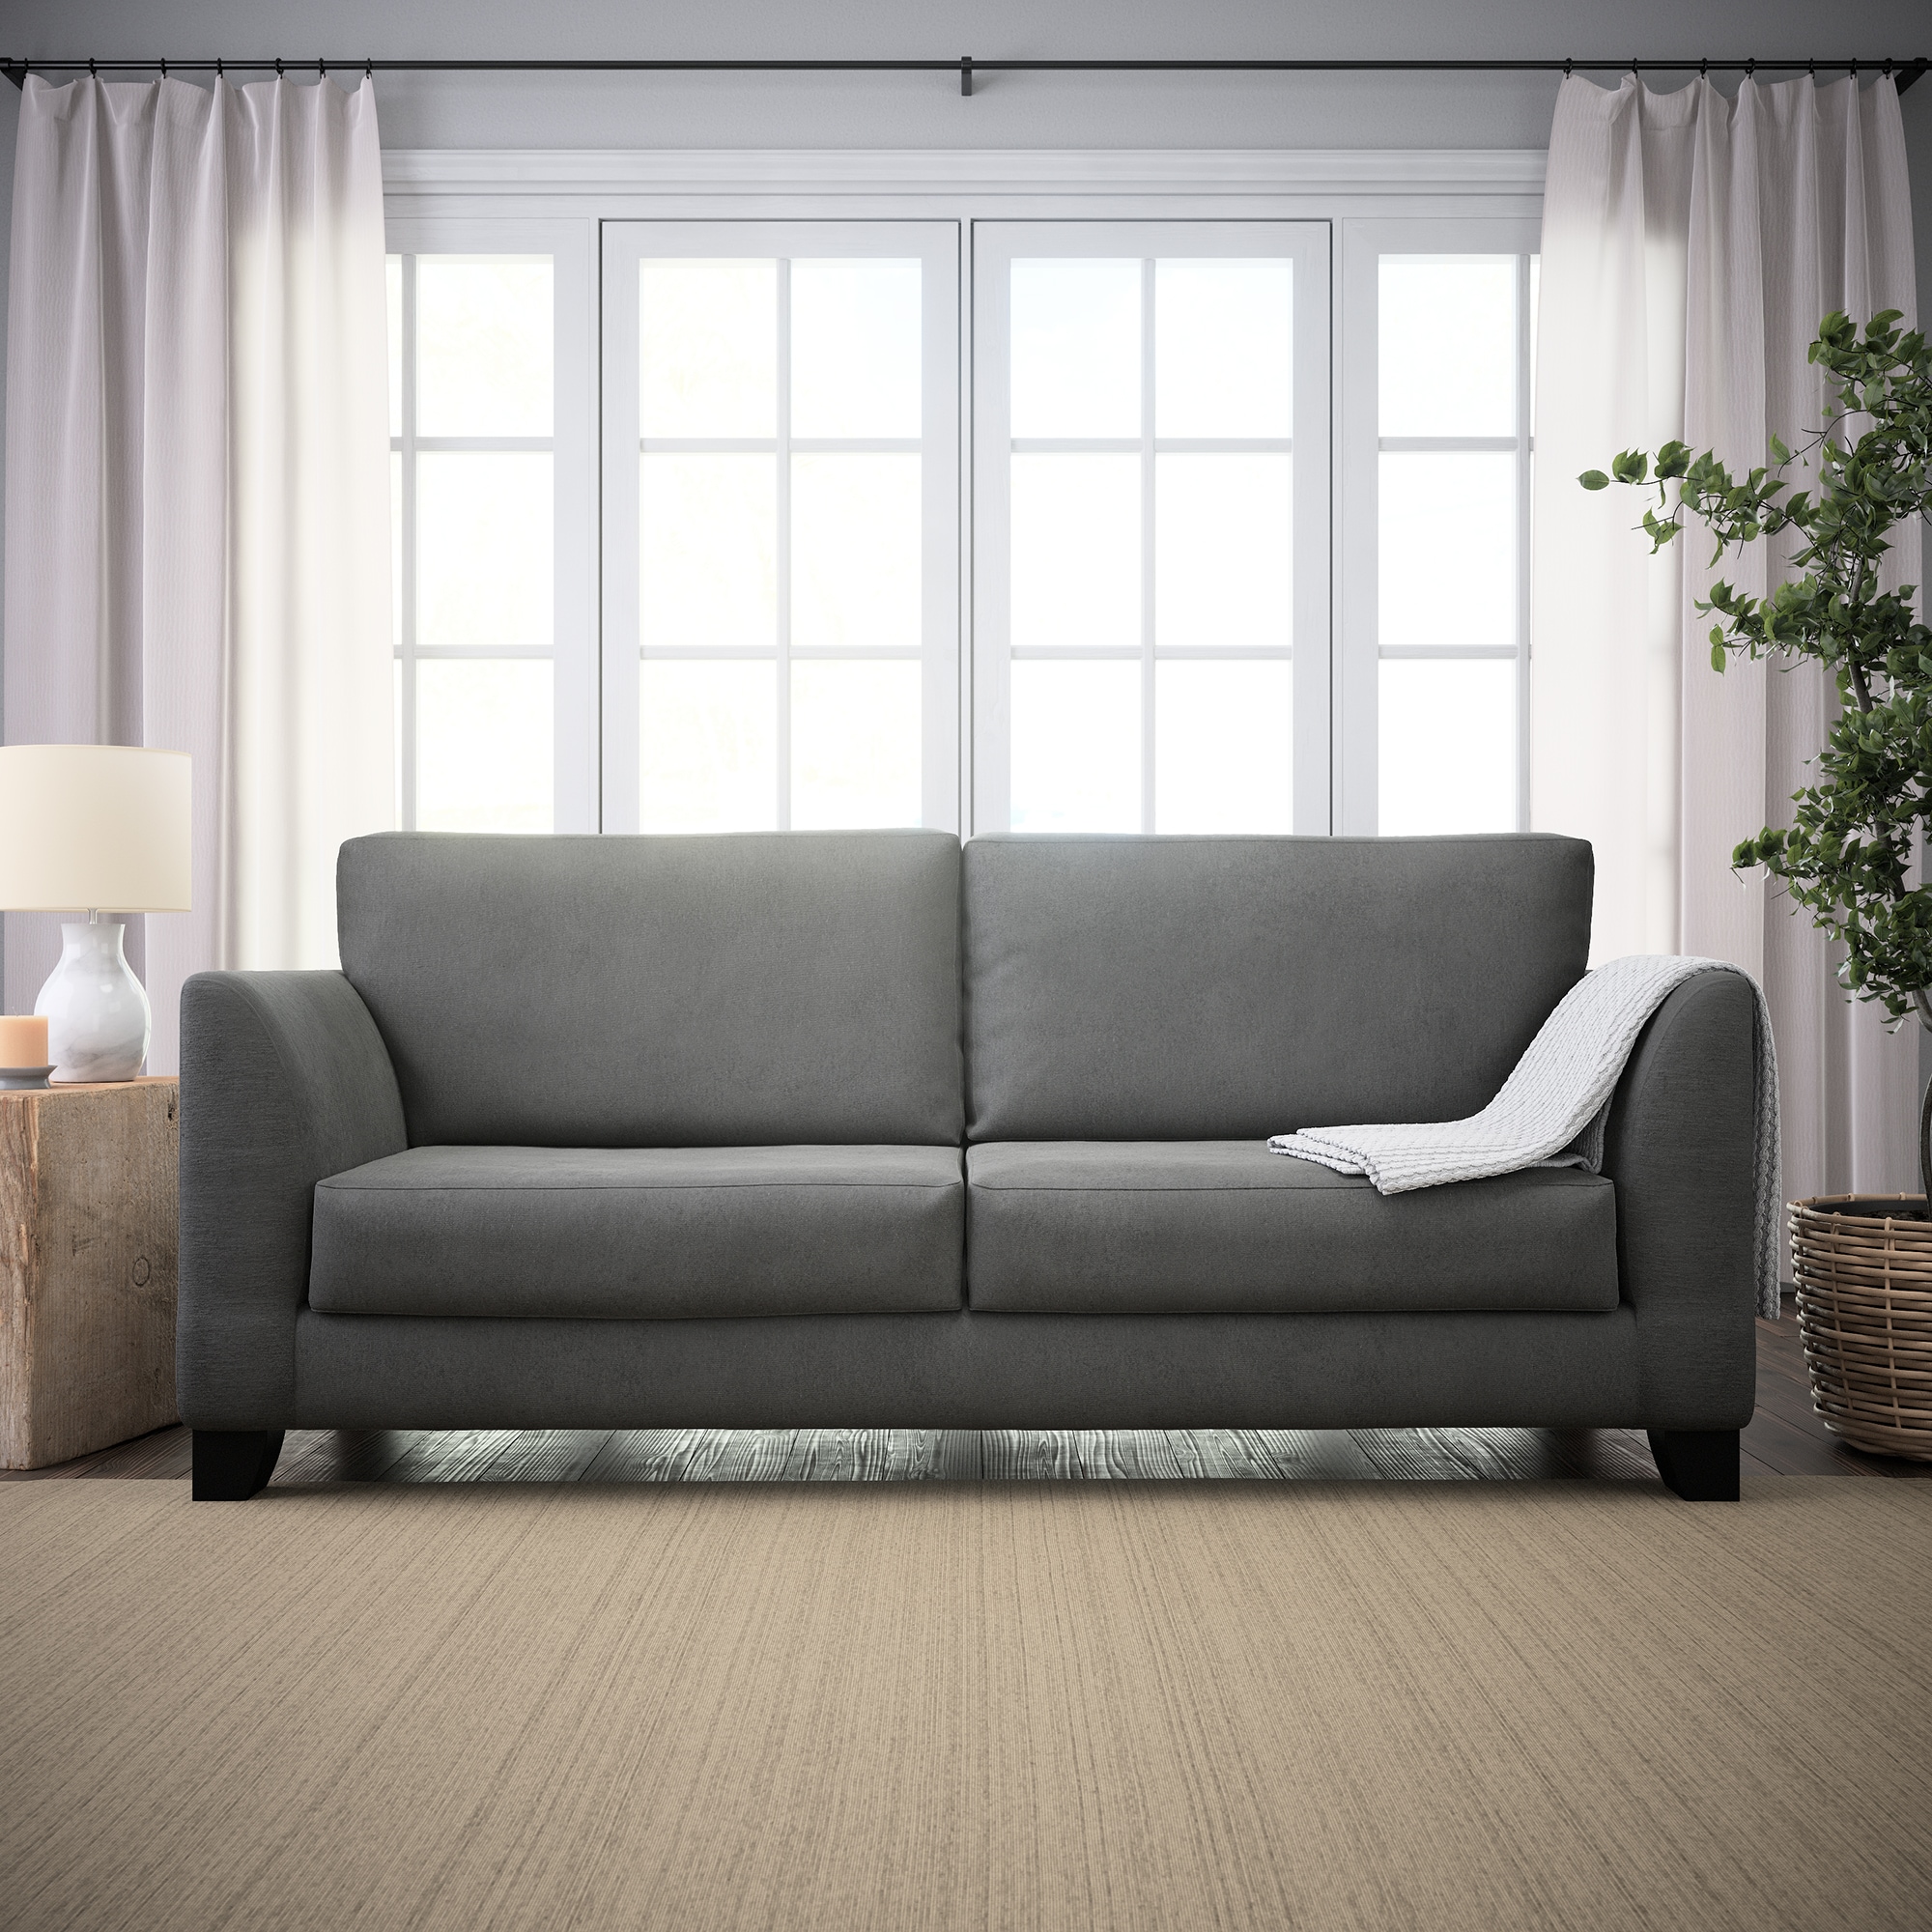 Brookside Holly Modern Charcoal Polyester/Blend Sofa in Gray | BS0006SOF00CH